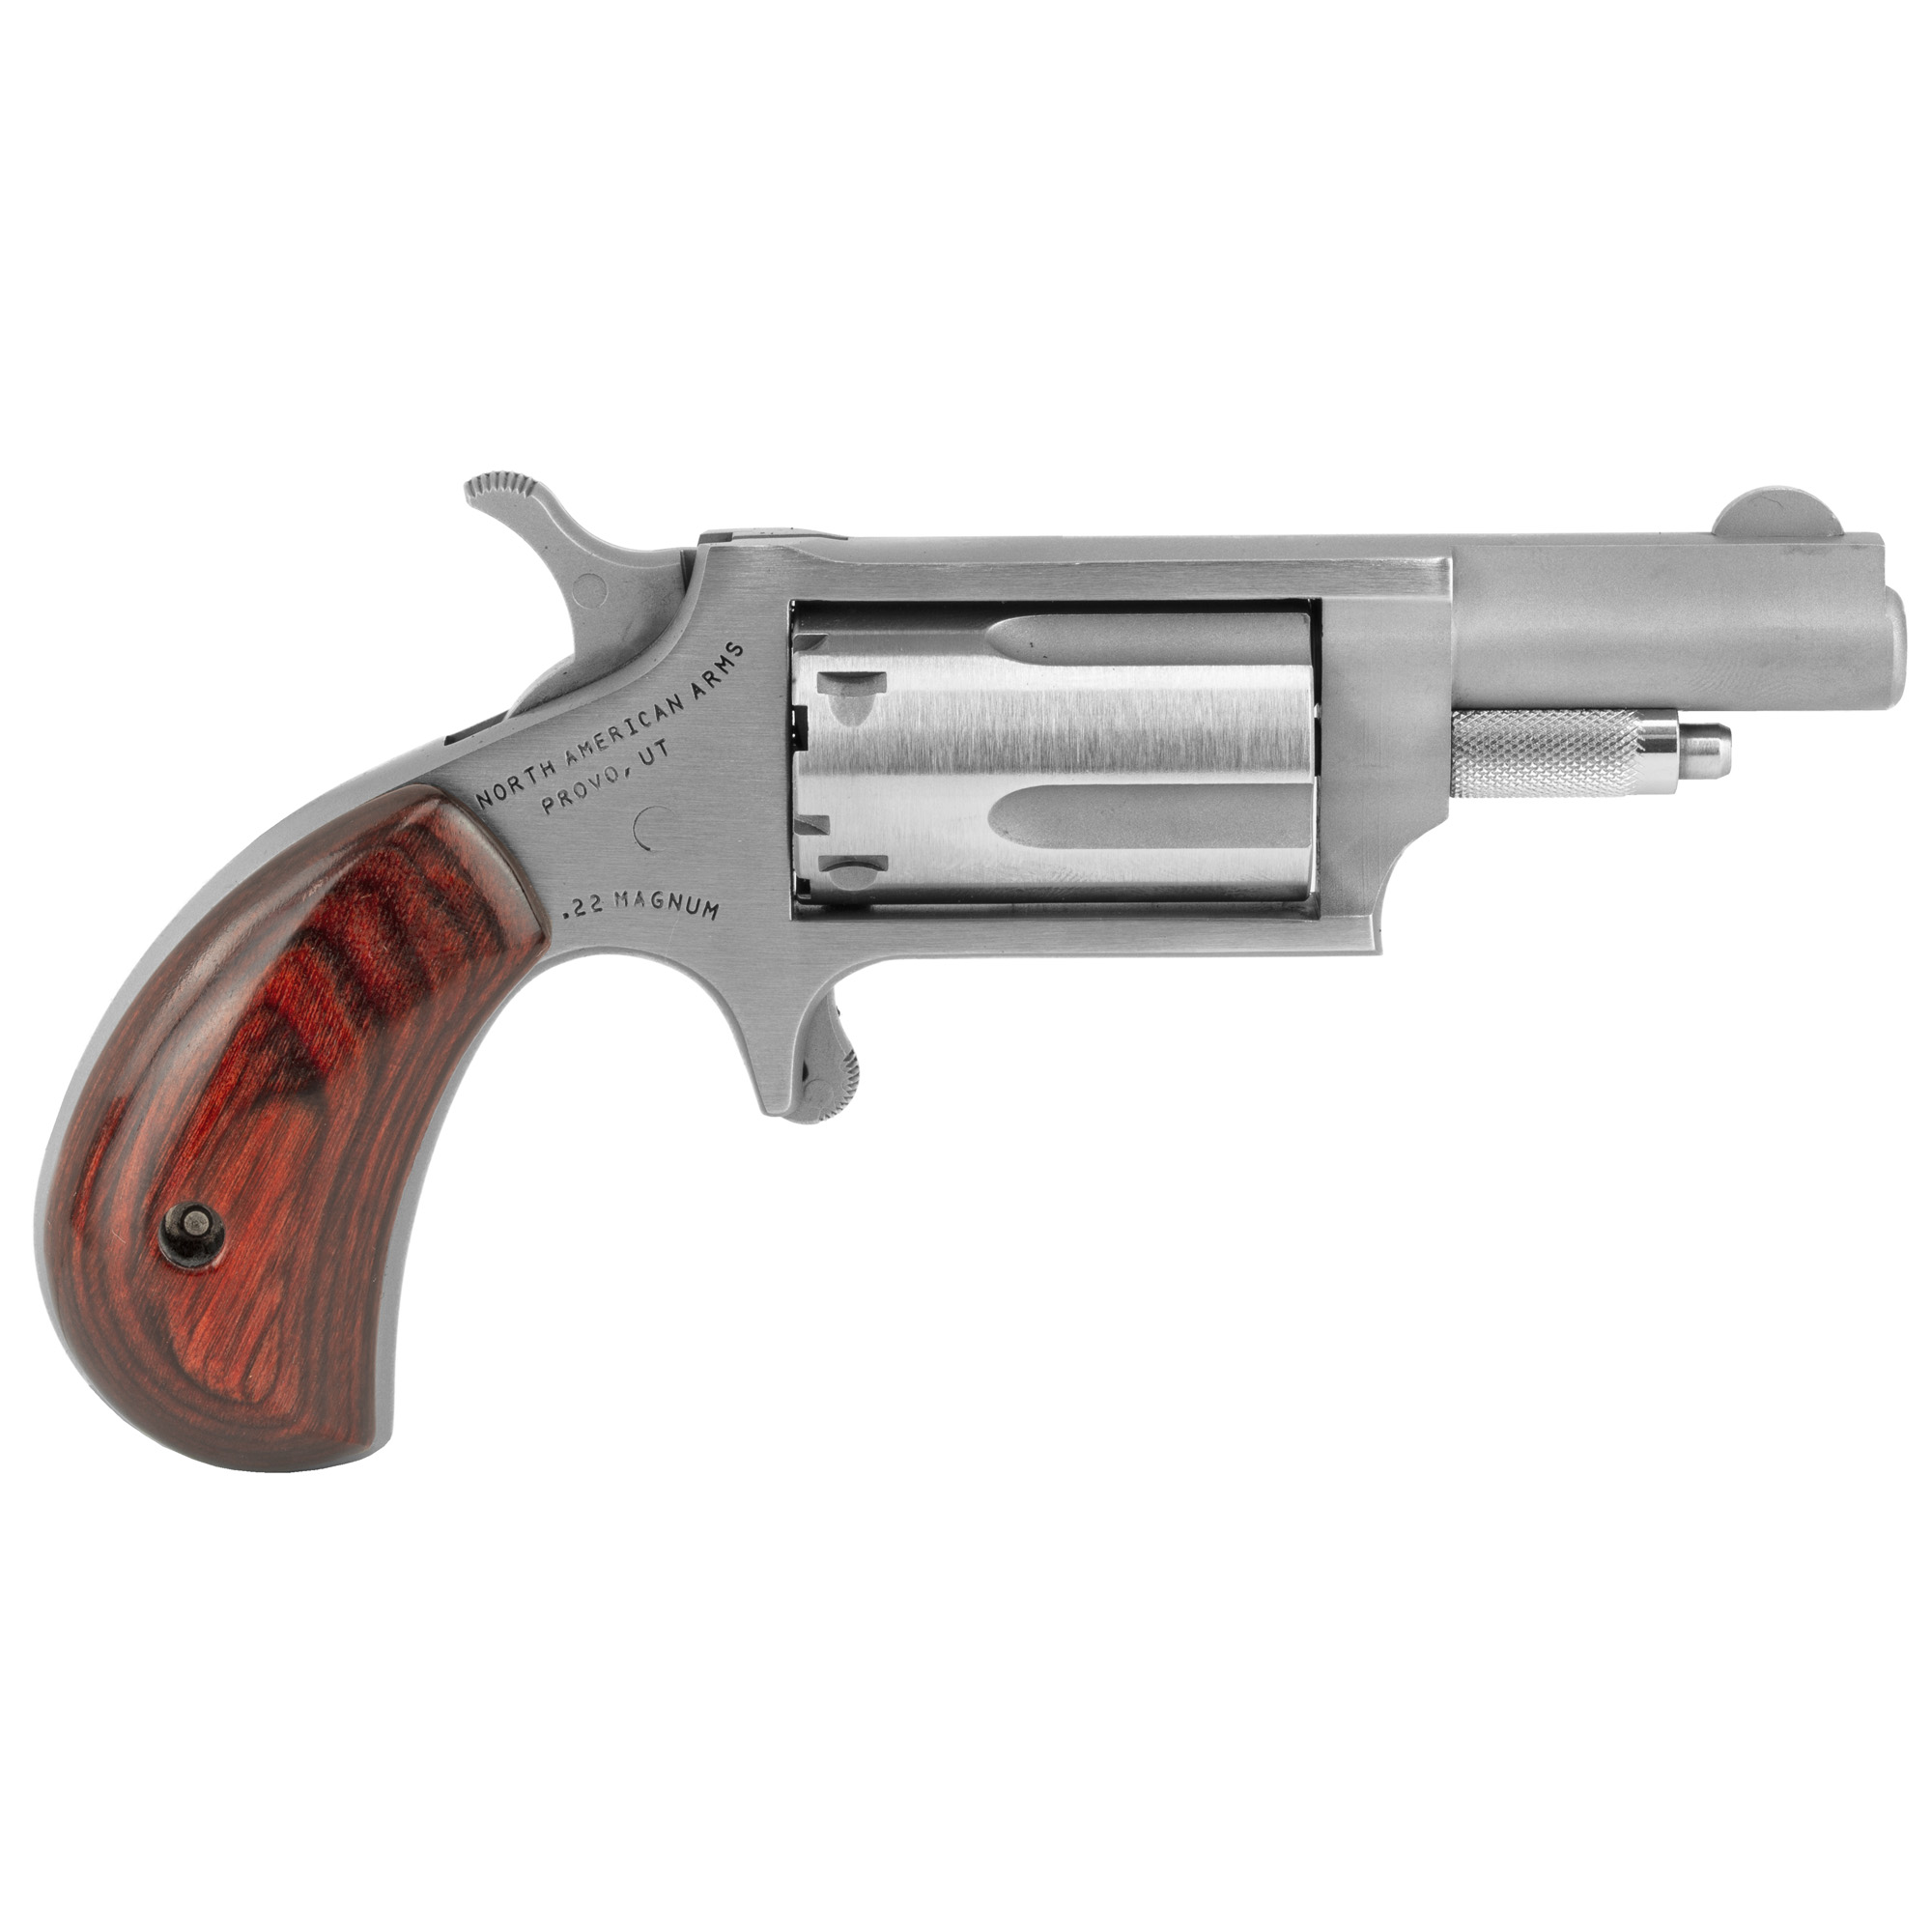 North American Arms, Mini Revolver, Single Action, Revolver, 22 WMR, 1.625" Barrel, Stainless Steel, Silver, Wood Grips, Fixed Sights, 5 Rounds